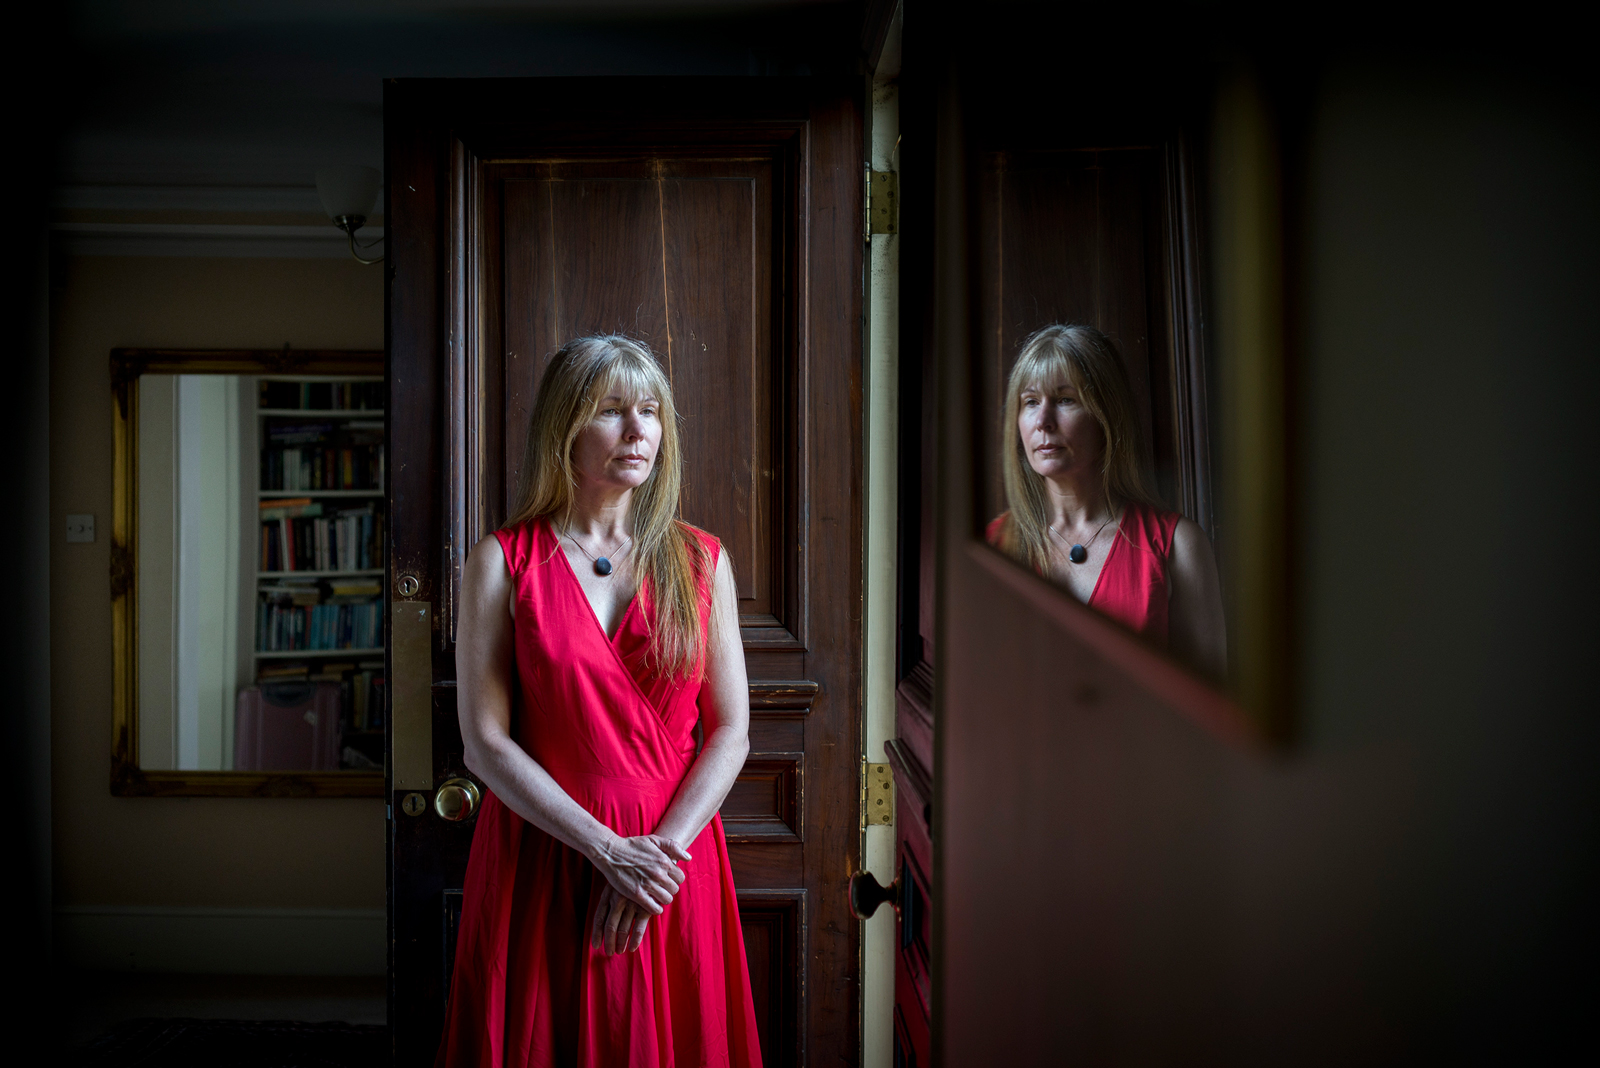 Clare Rewcastle Brown at her home in London on July 22, 2013 (Andrew Testa—The New York Times/Redux)